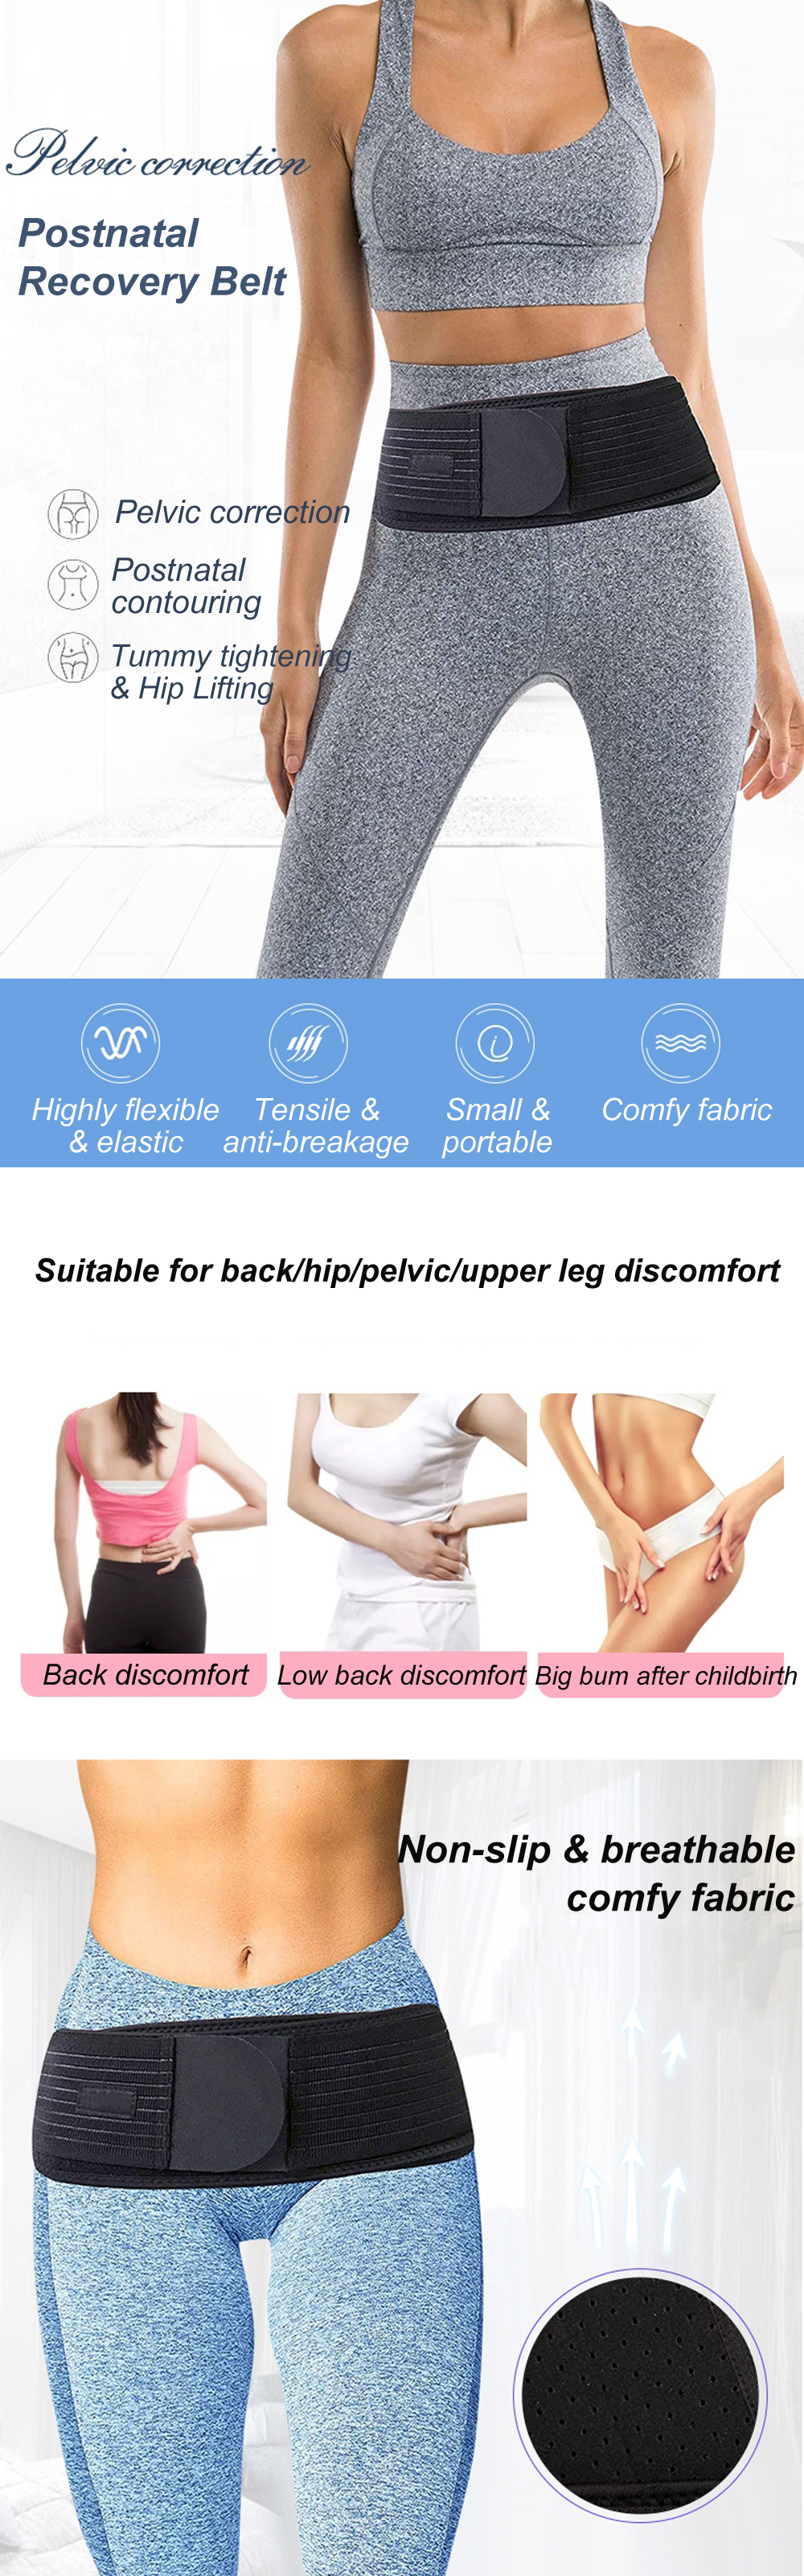 Sacroiliac-SI-Joint-Support-Waist-Belt-Reduce-Sciatic-Pelvic-Lower-Back-and-Leg-Pain-Stabilize-SI-Jo-1918488-1